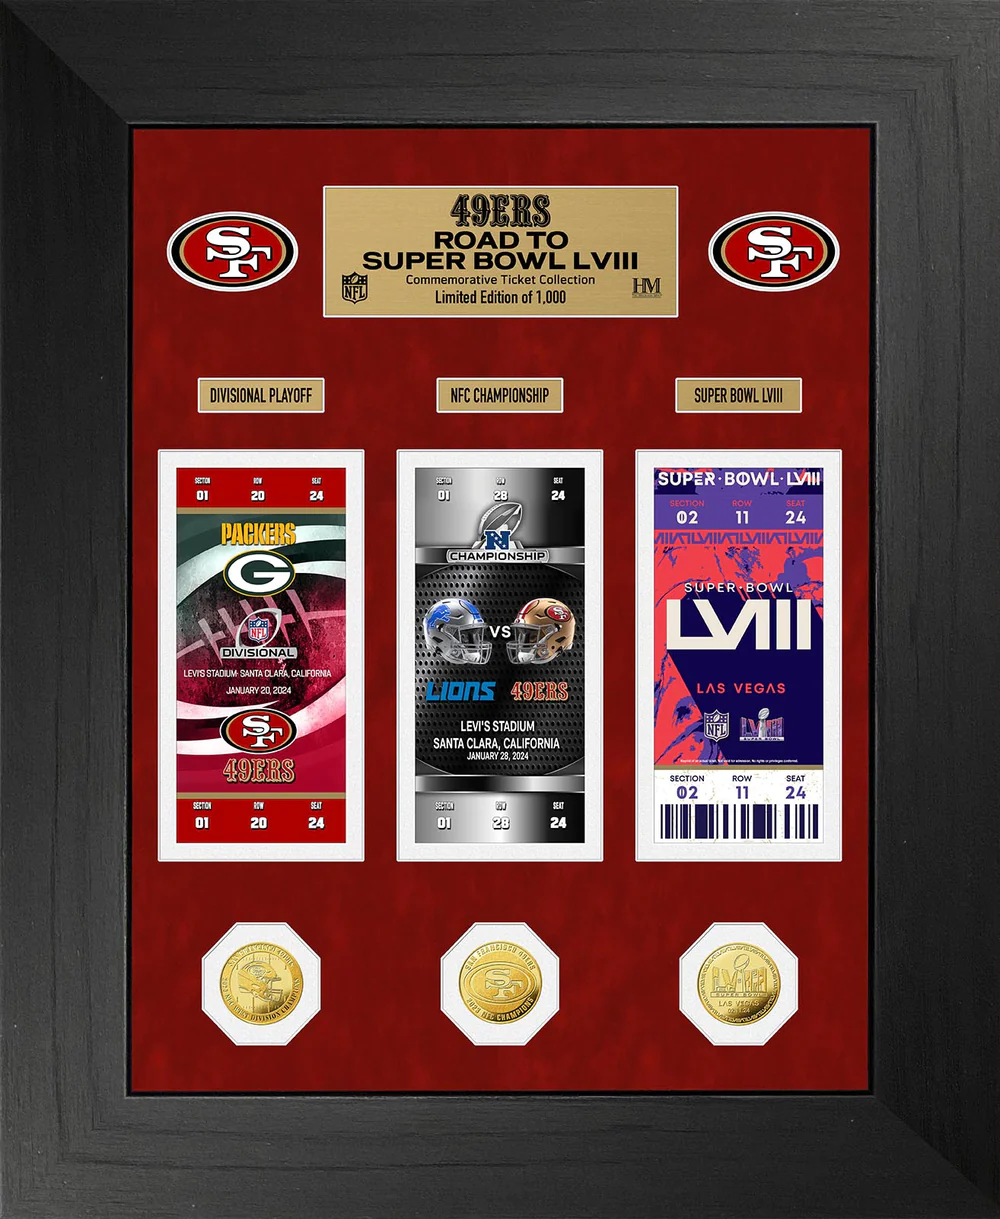 San Francisco 49ers Road to Super Bowl LVIII Deluxe Ticket and Gold Coin Photo Mint 